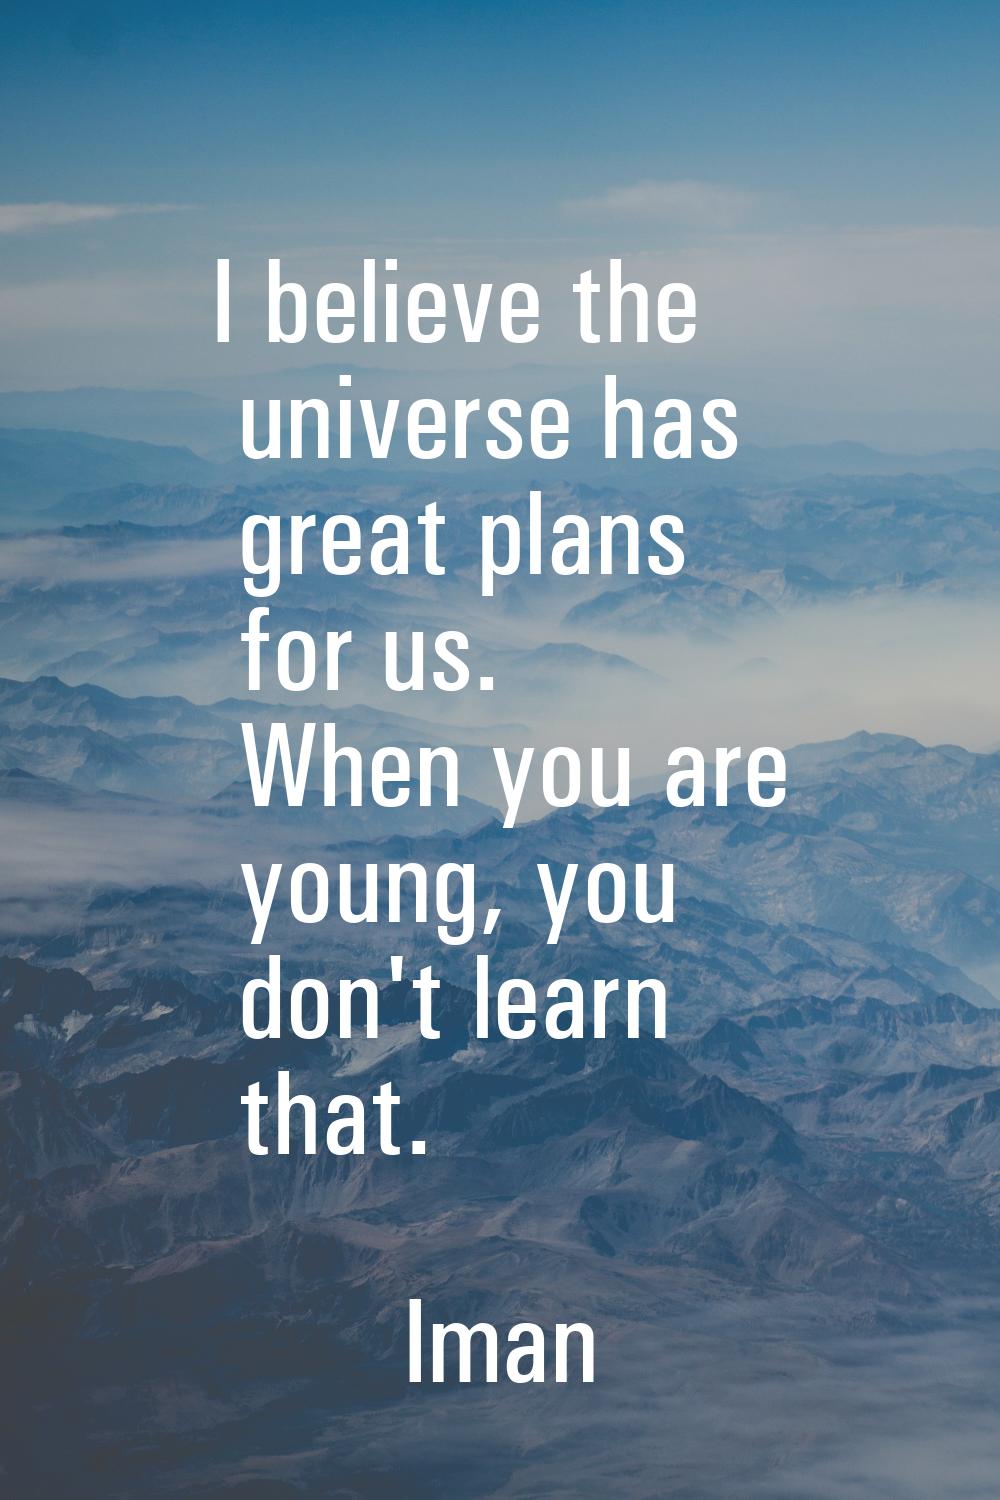 I believe the universe has great plans for us. When you are young, you don't learn that.